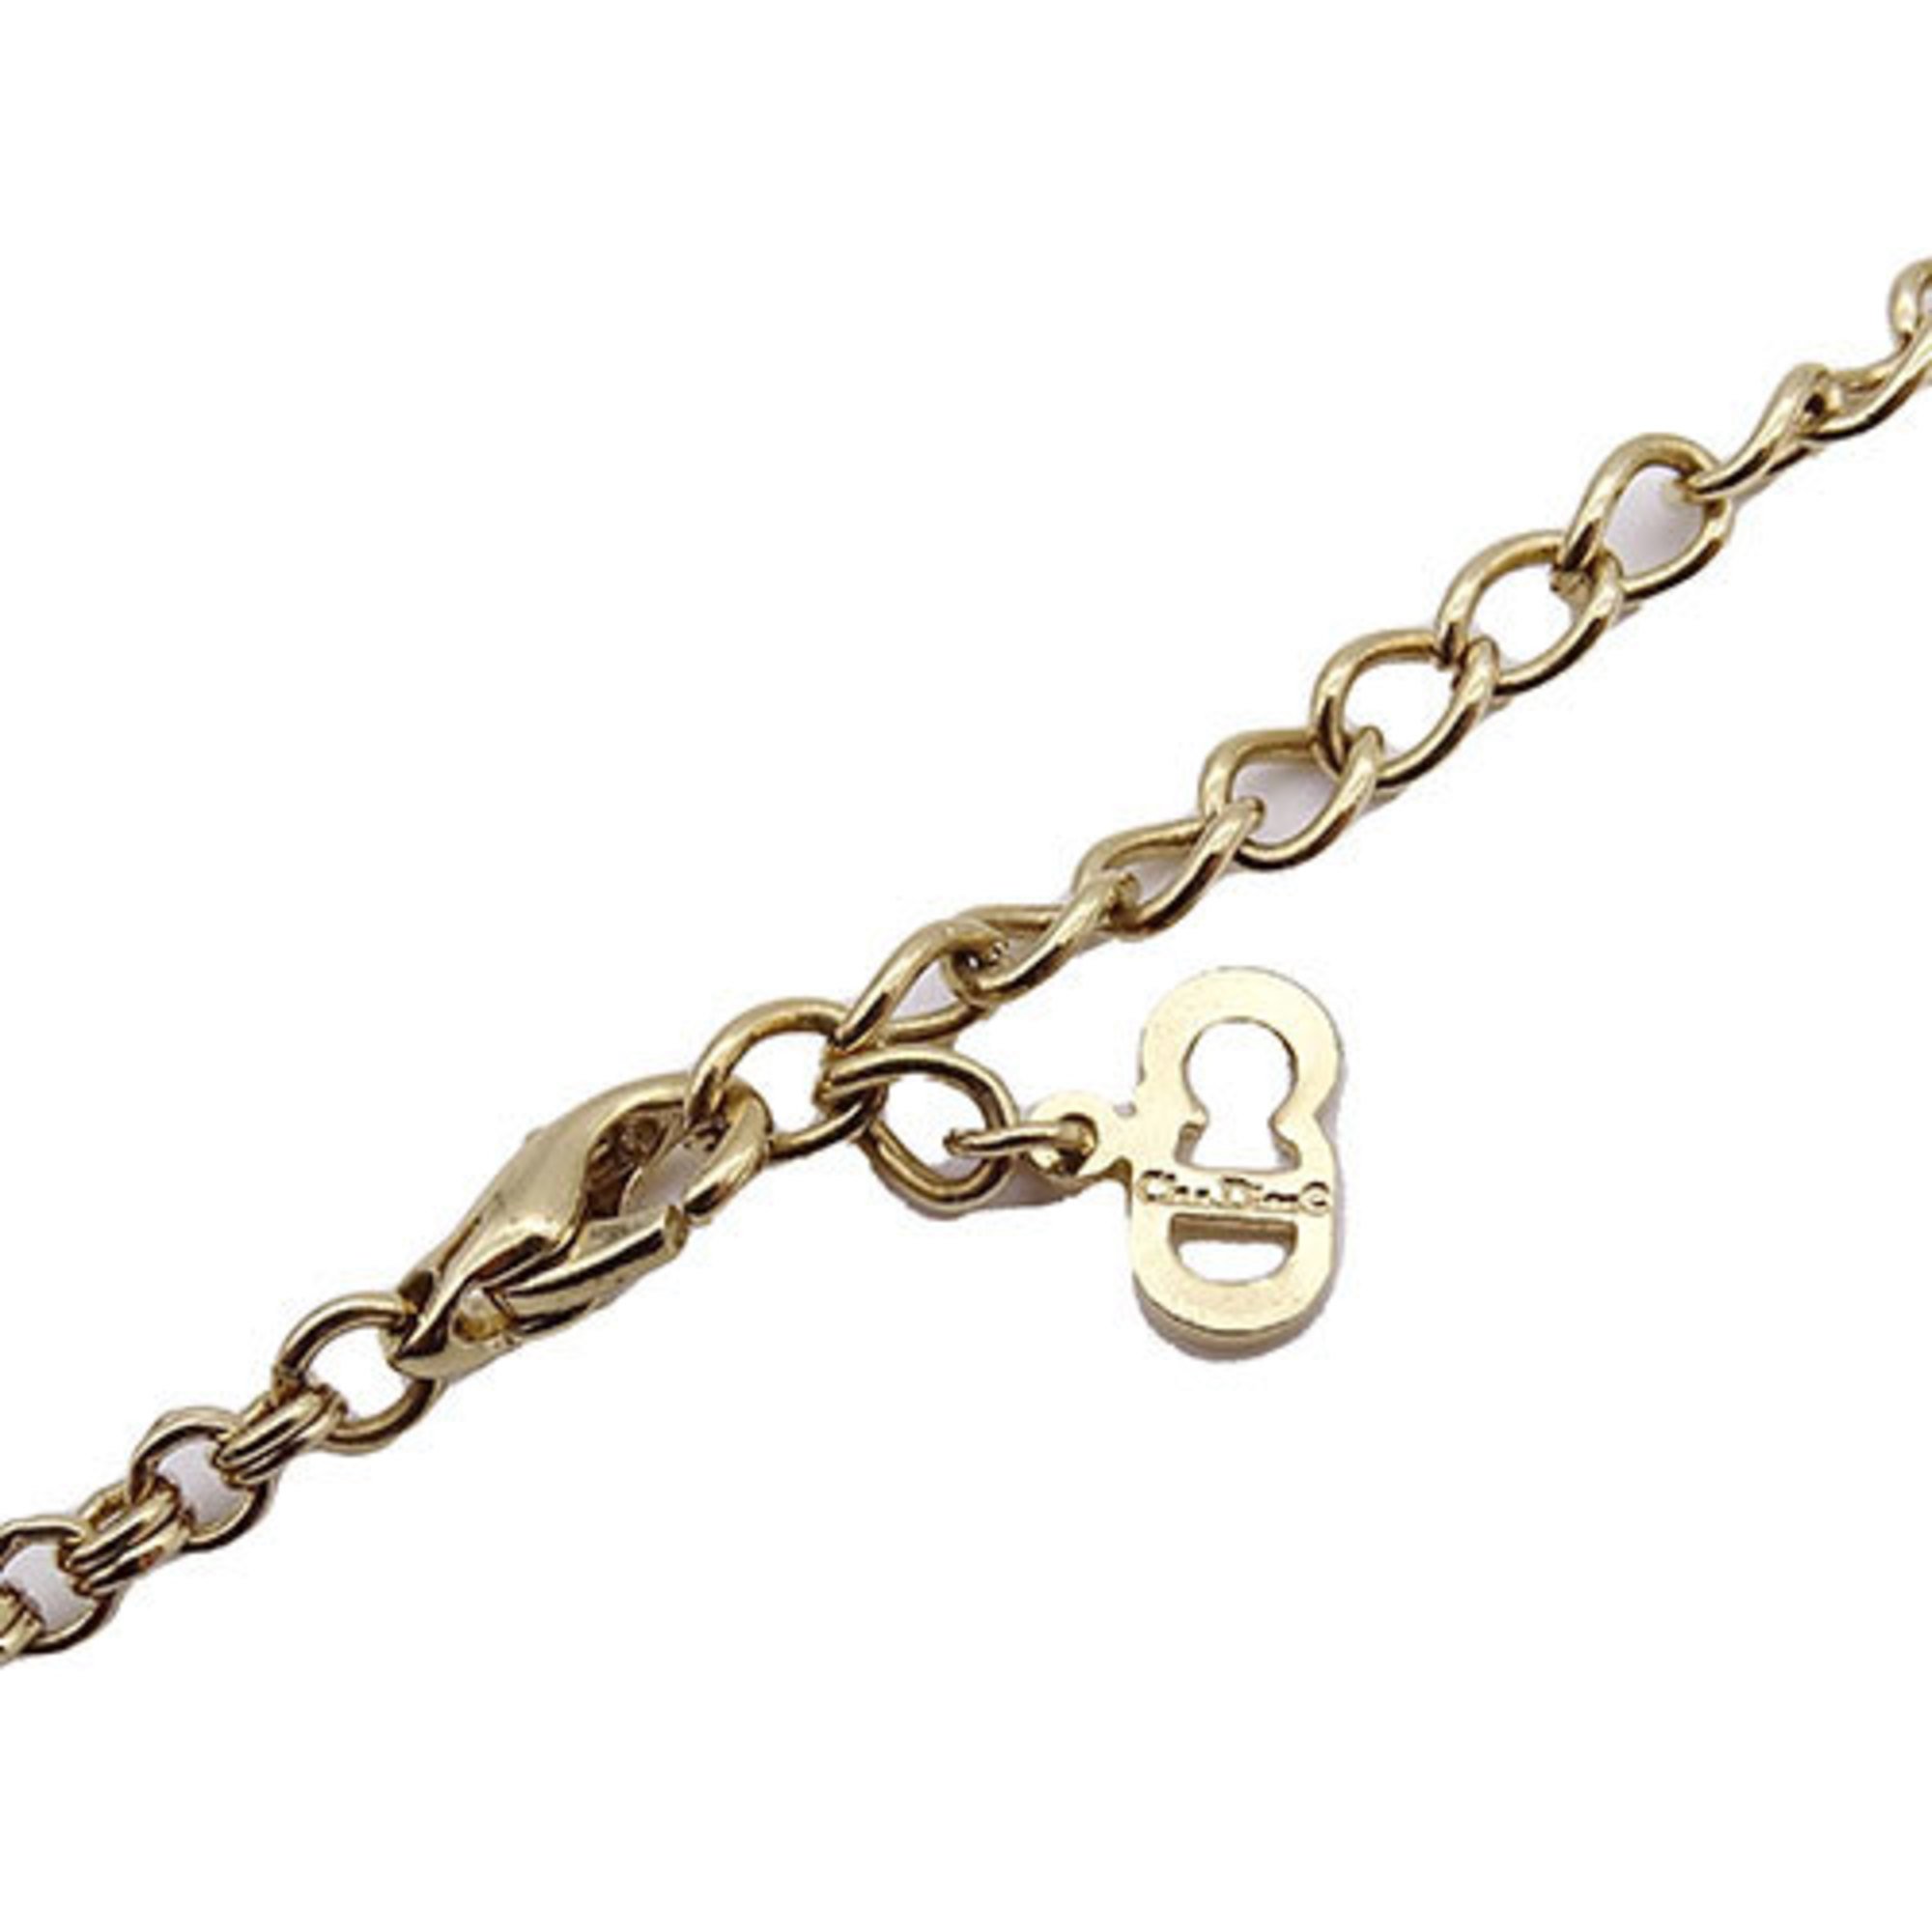 Christian Dior Necklace Women's Gold